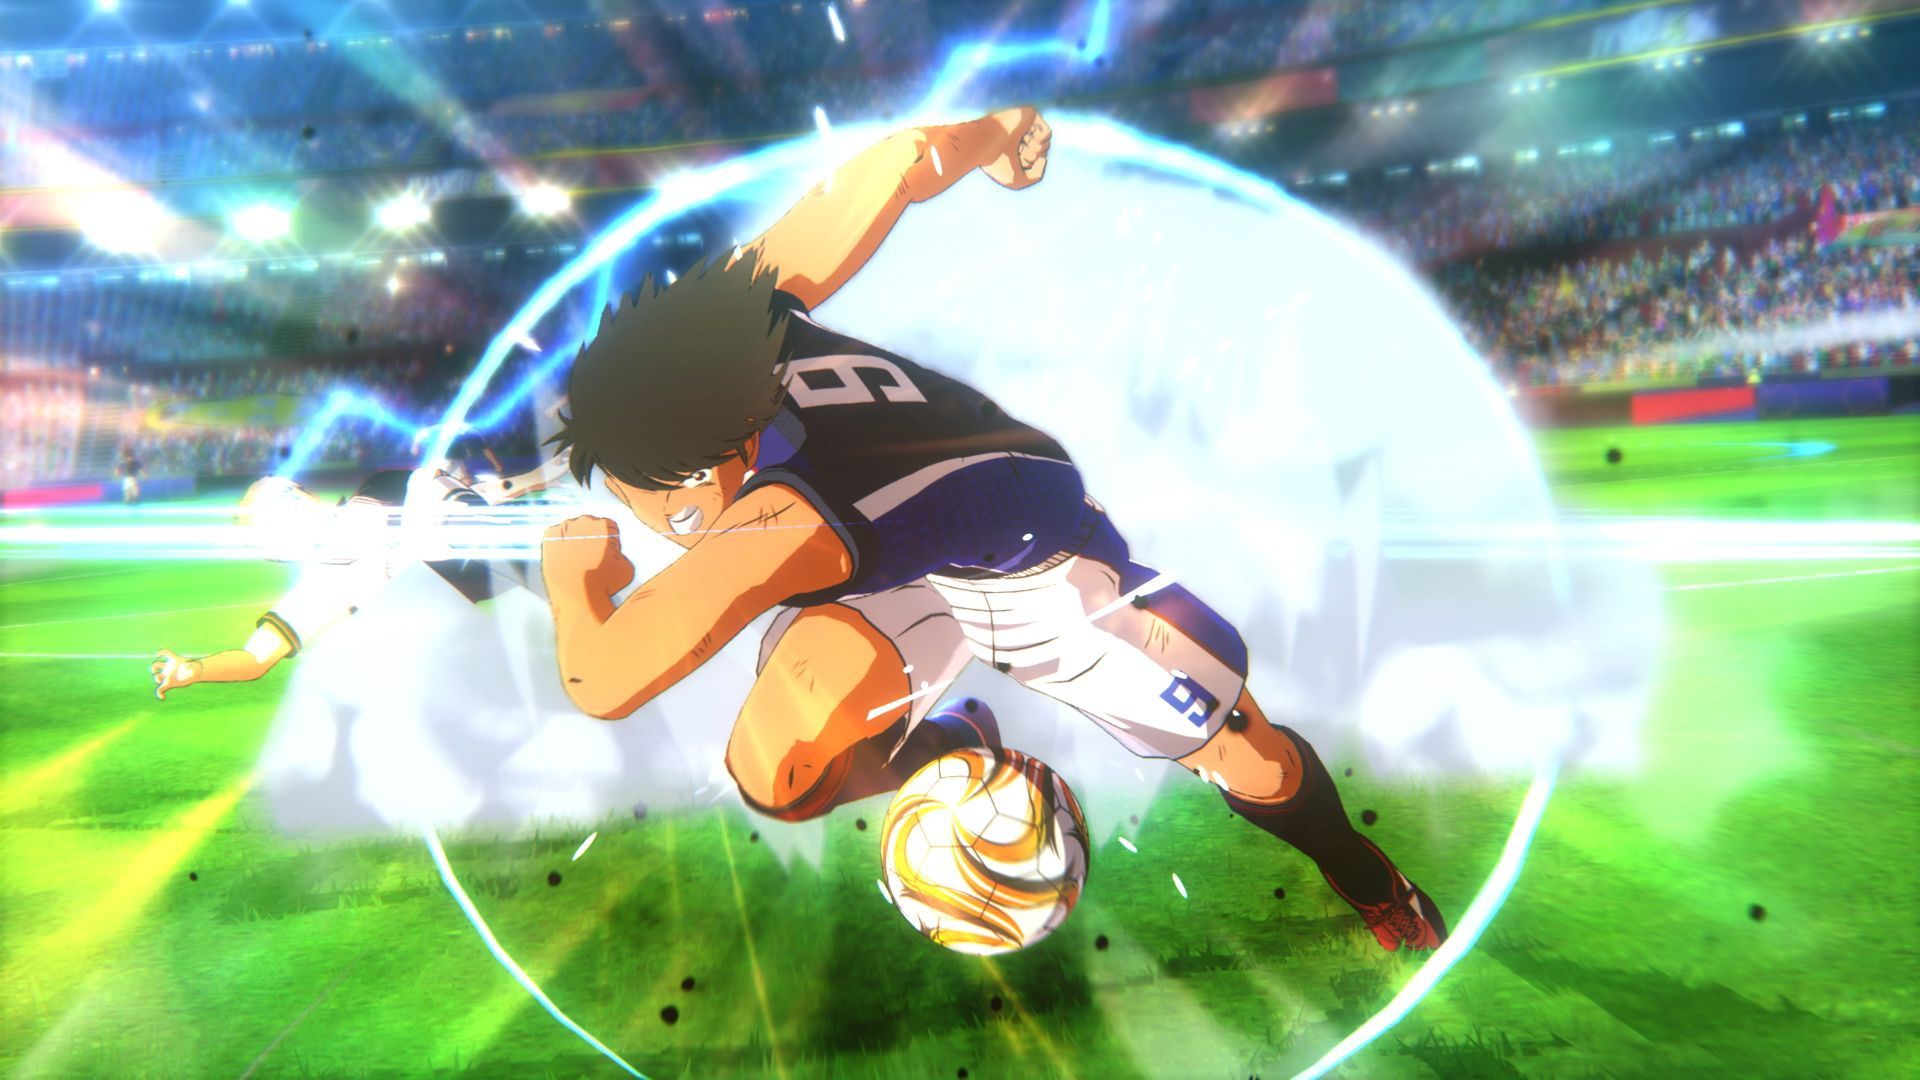 Oliver and Benji's video game is the soccer arcade you've been waiting for all these years